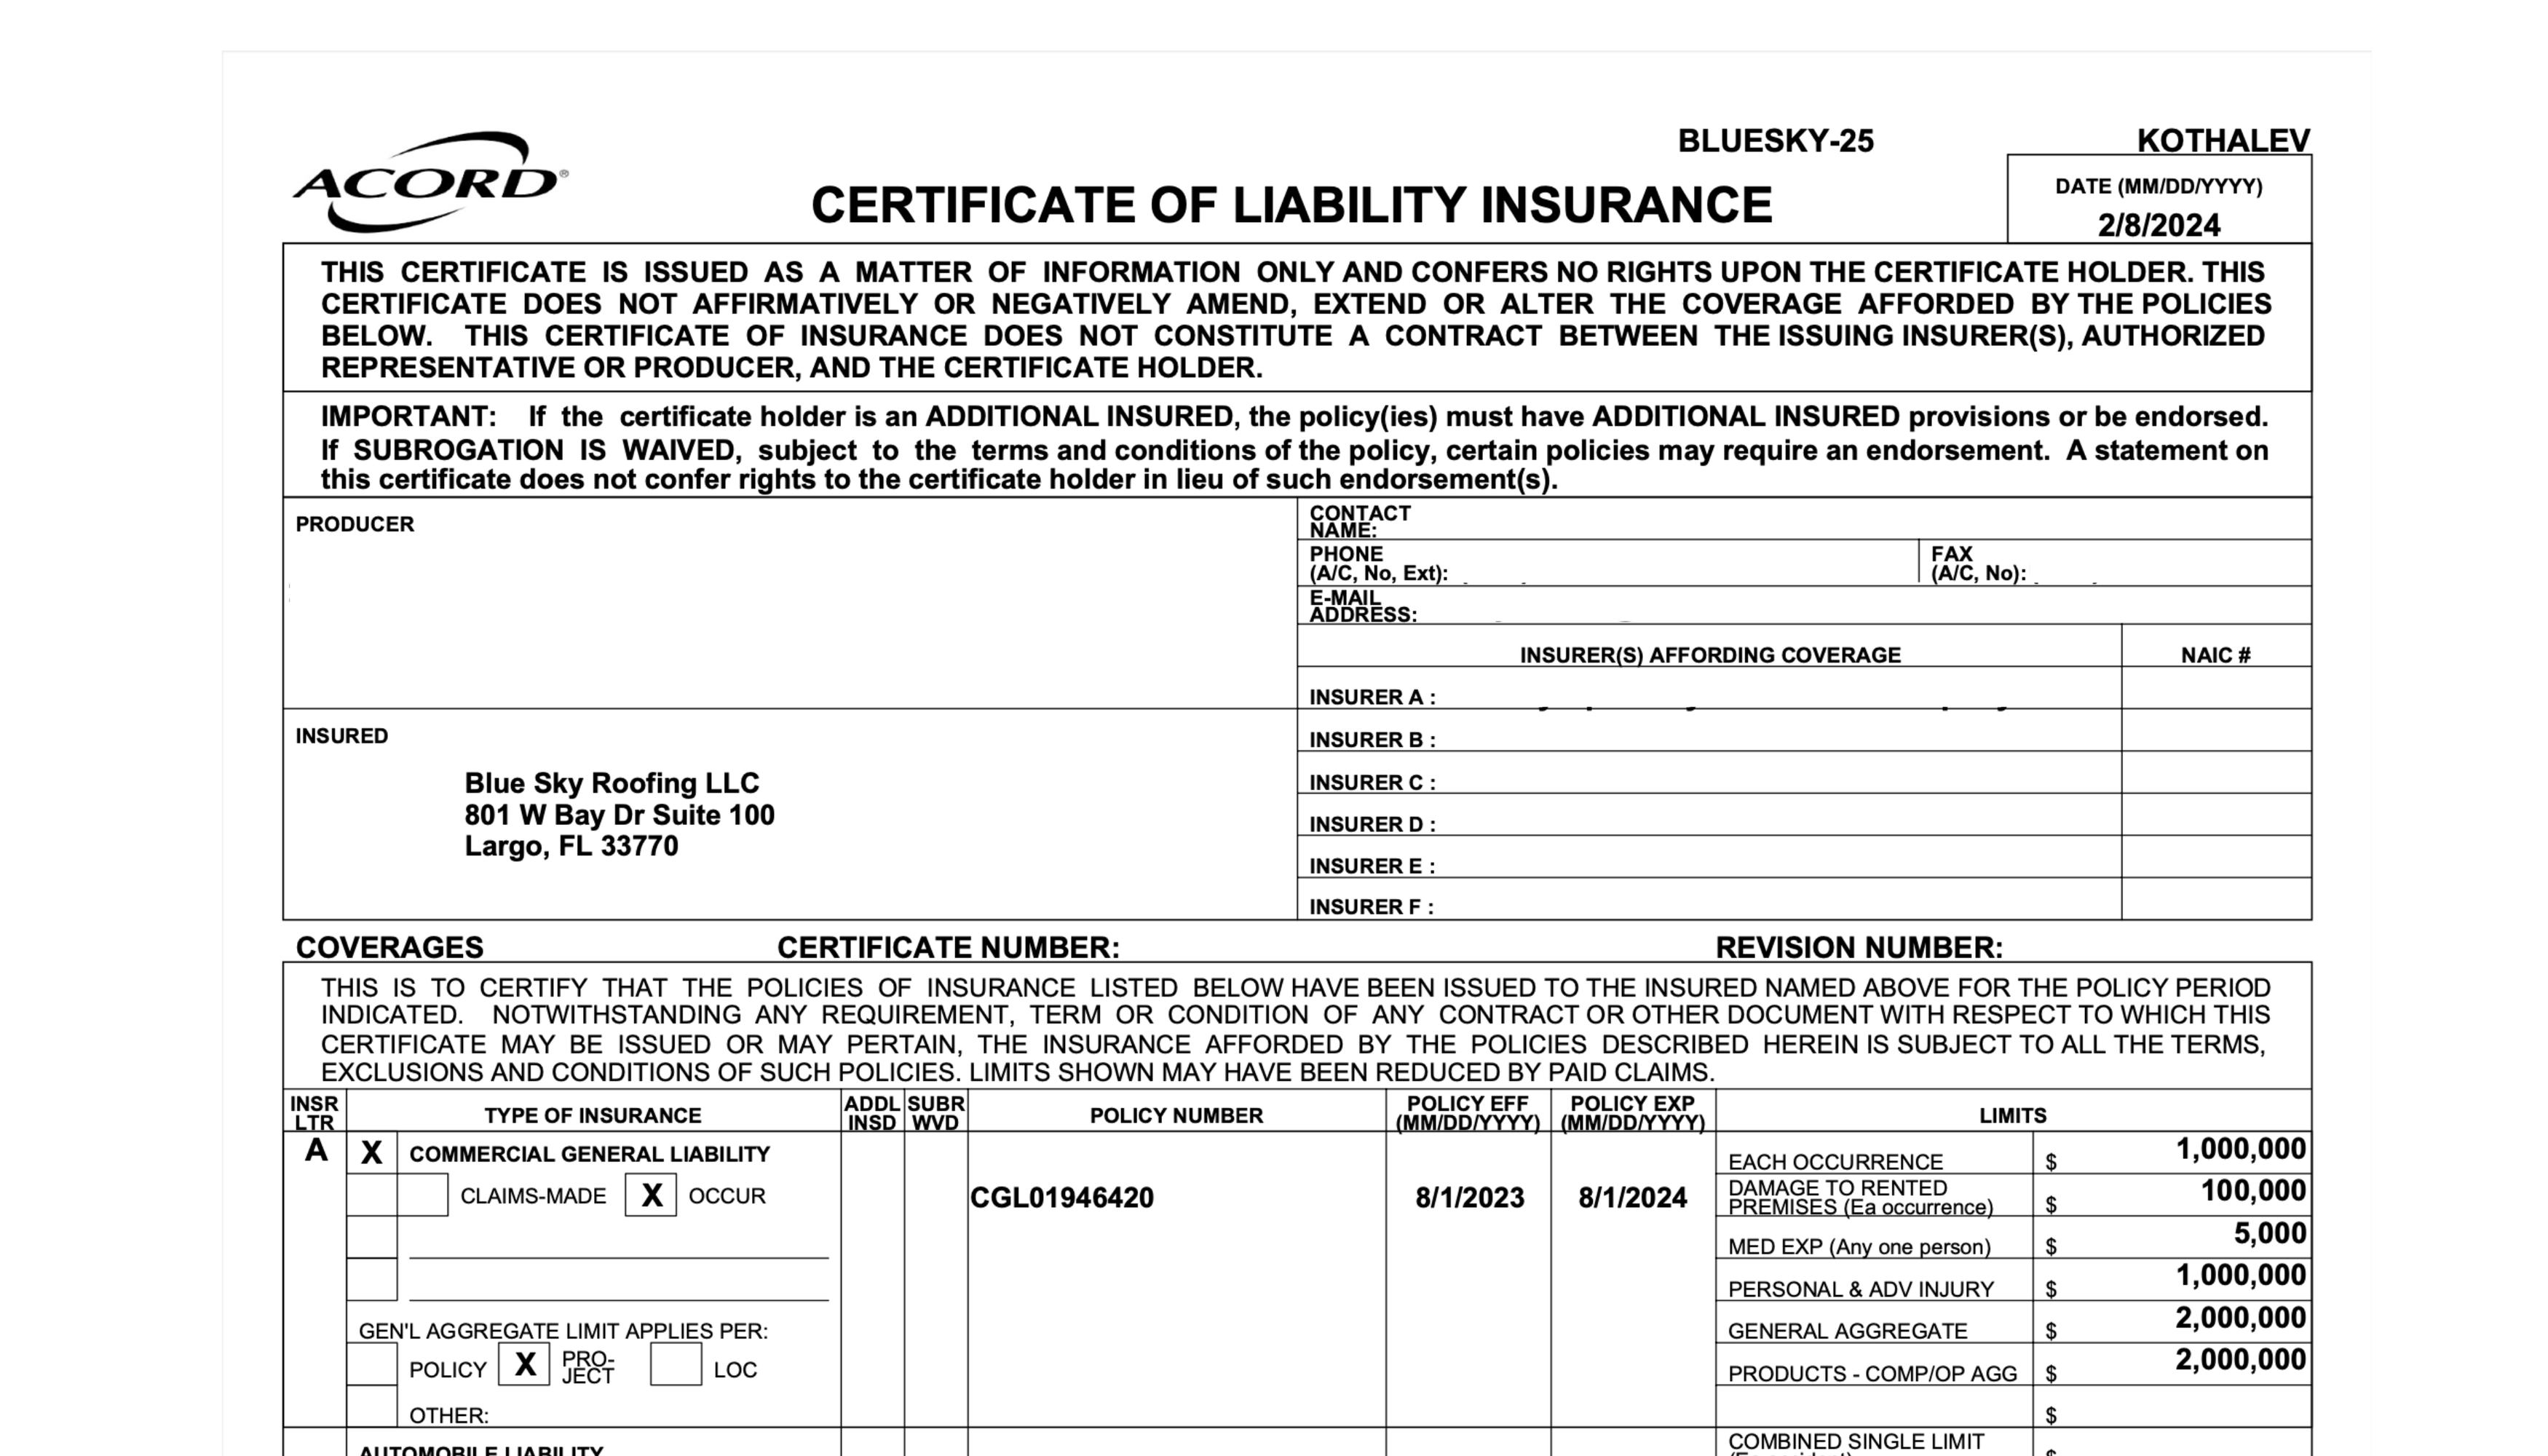 Acord Certificate of Liability Insurance Document